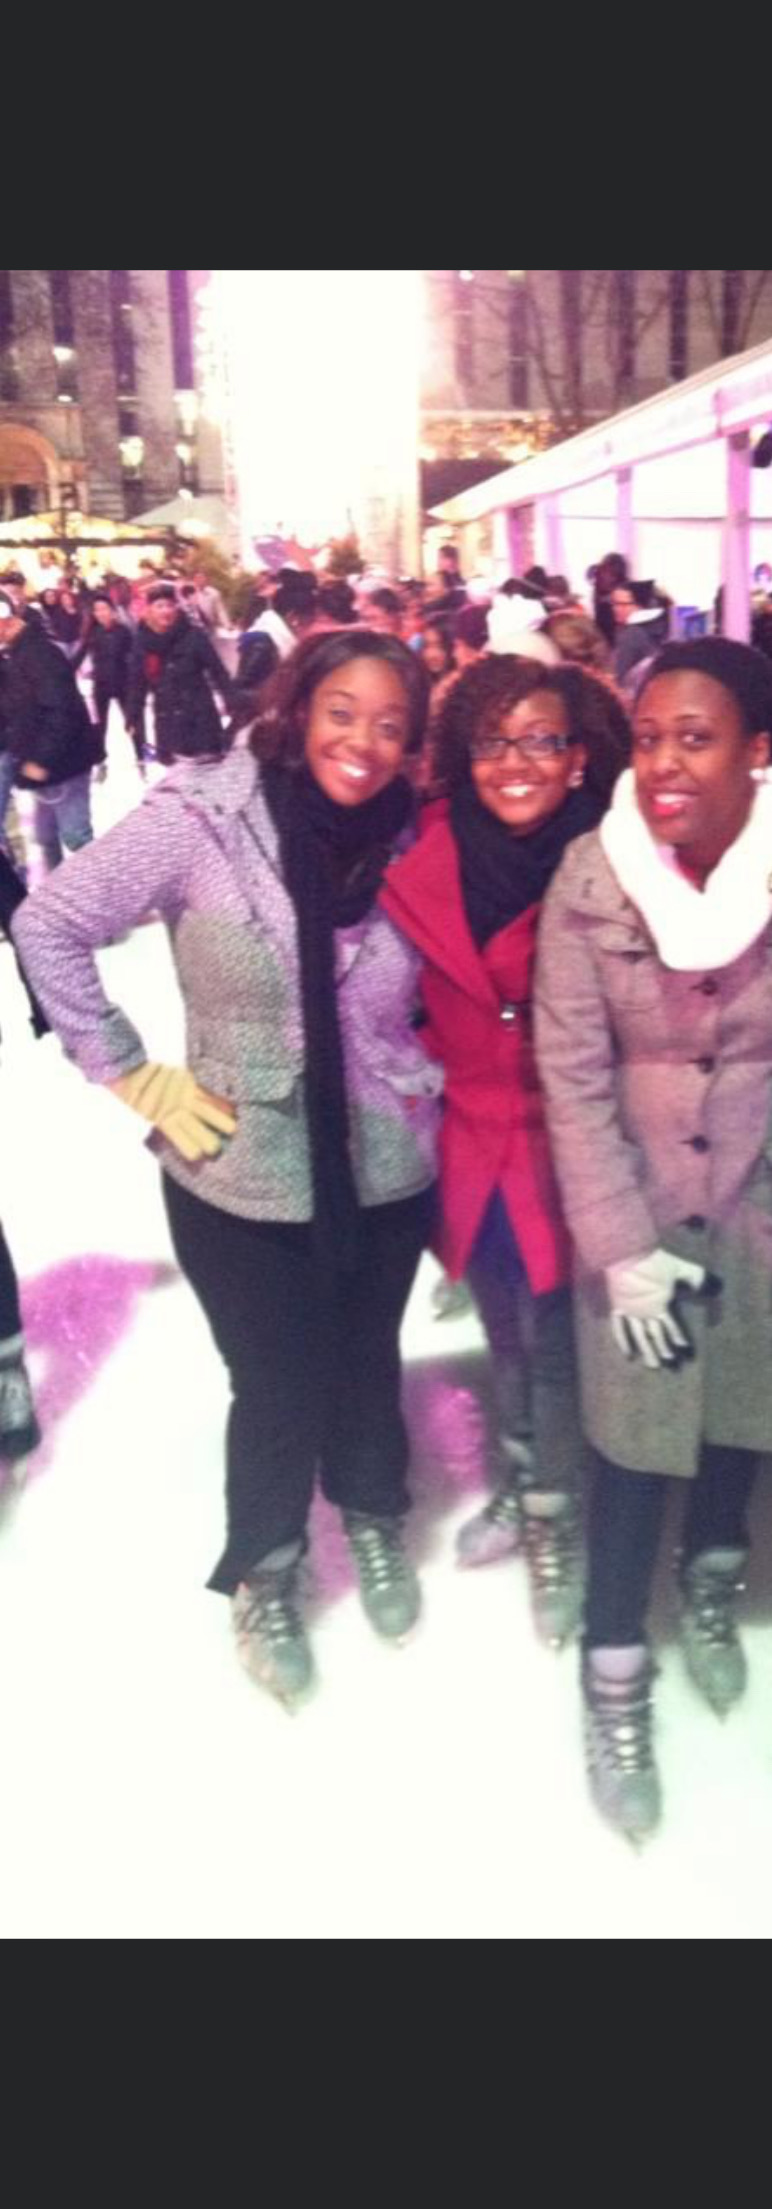 Friends at The Rink at Bryant Park Christmas Village